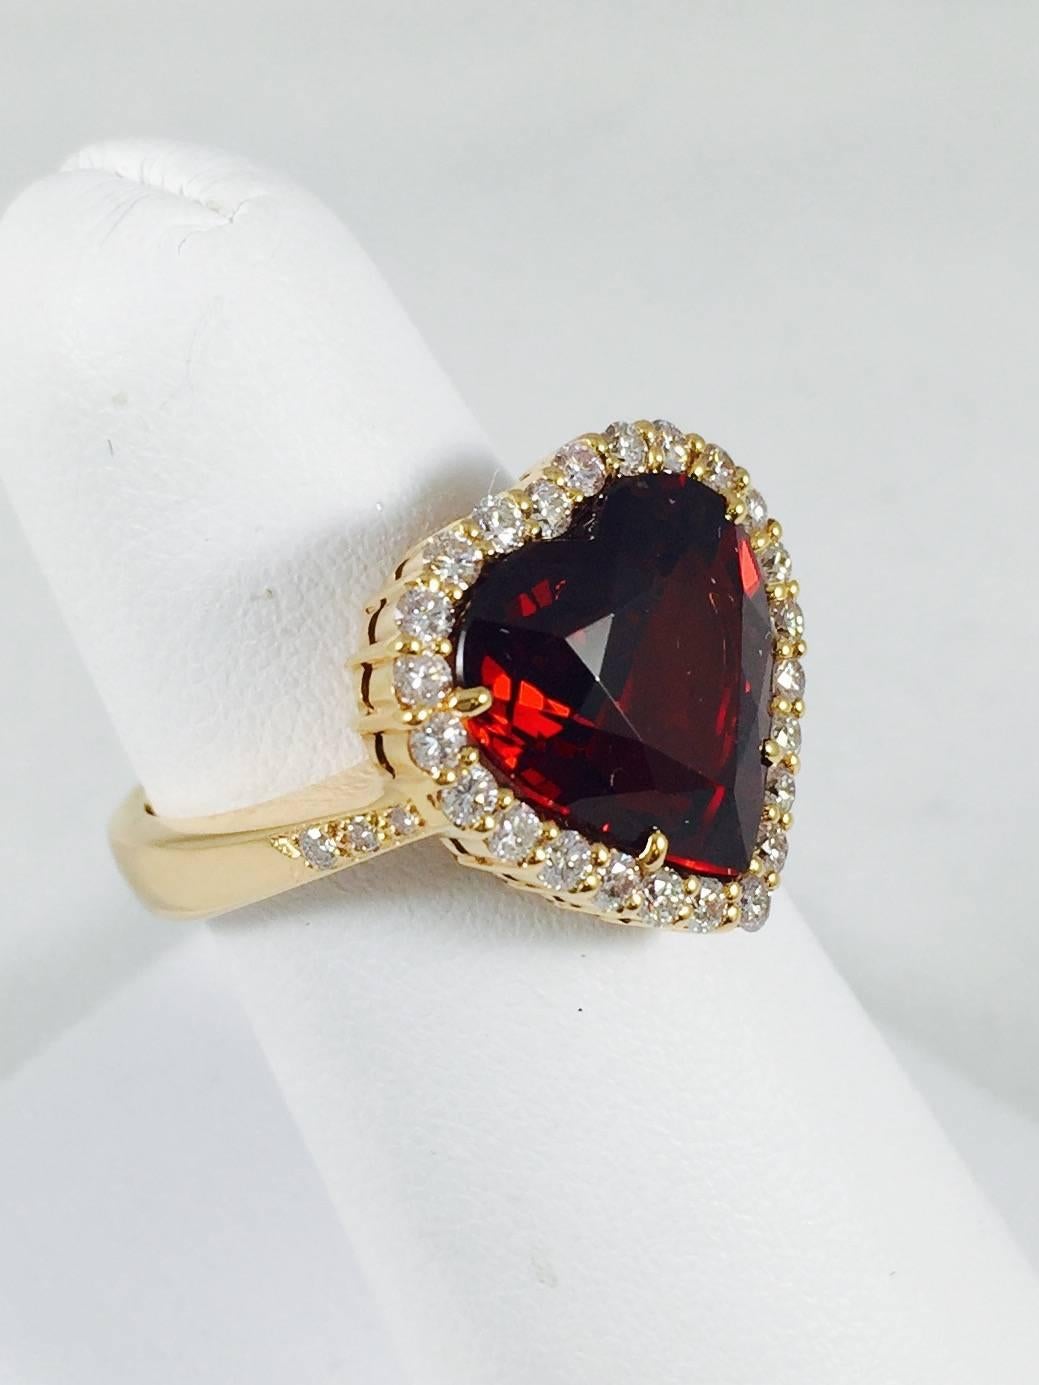 Definitely the most endearing shape in jewelry. Artfully crafted in 18 Karat Rose Gold enhancing the beauty of this rarely found Spessartite Garnet, 8.18 carat, heart shape stone.  For further beauty, the heart is framed in Very Light Pink brilliant